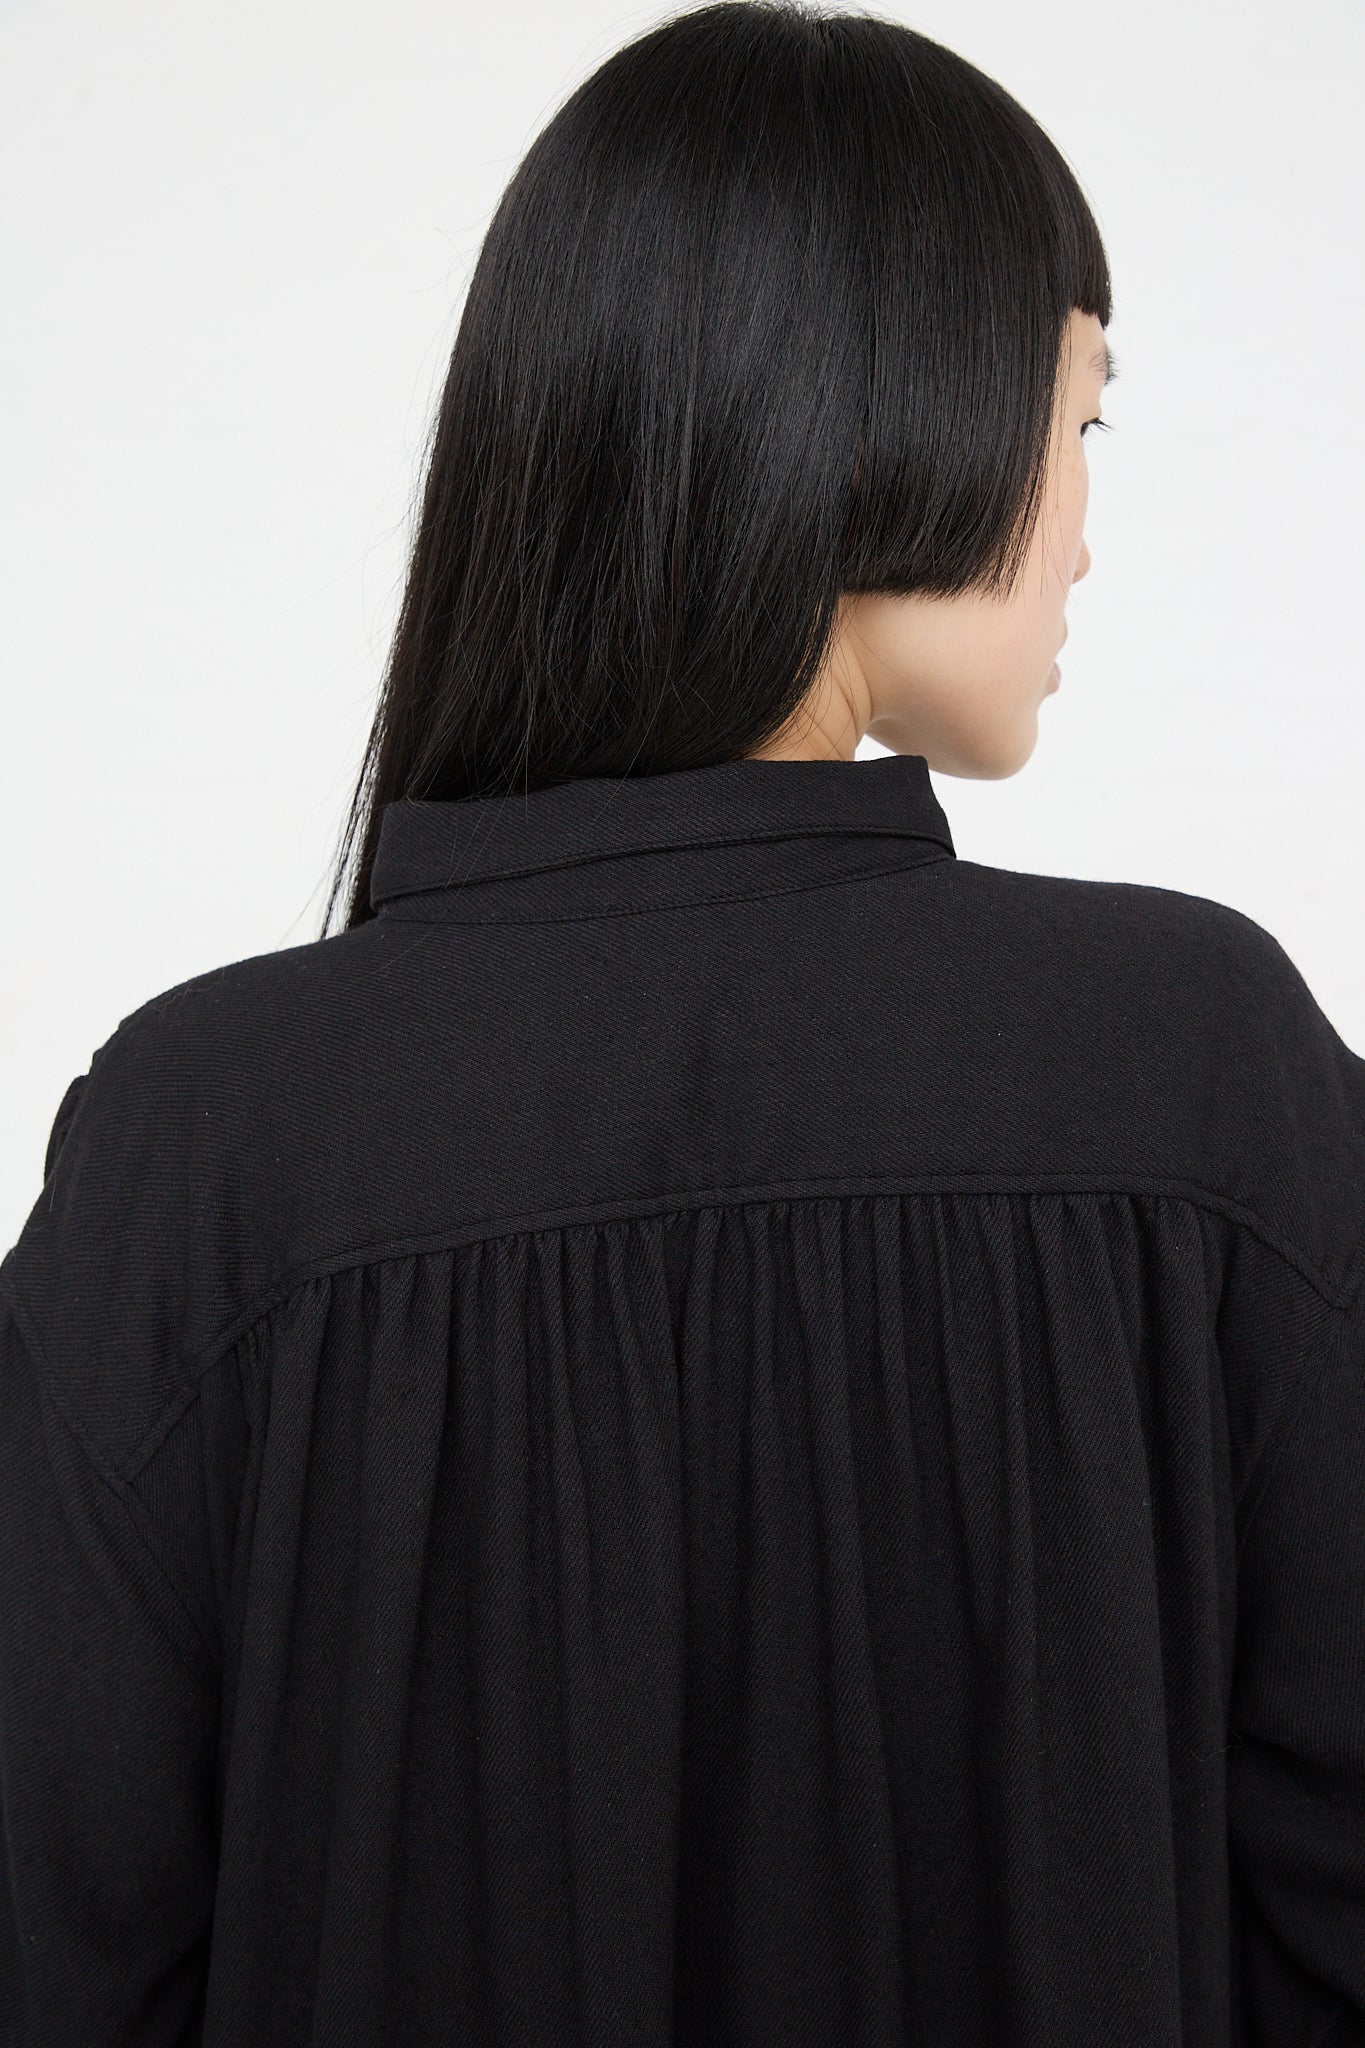 The back view of a woman wearing an Ichi Woven Dress in Black made from natural fibers. Up close.